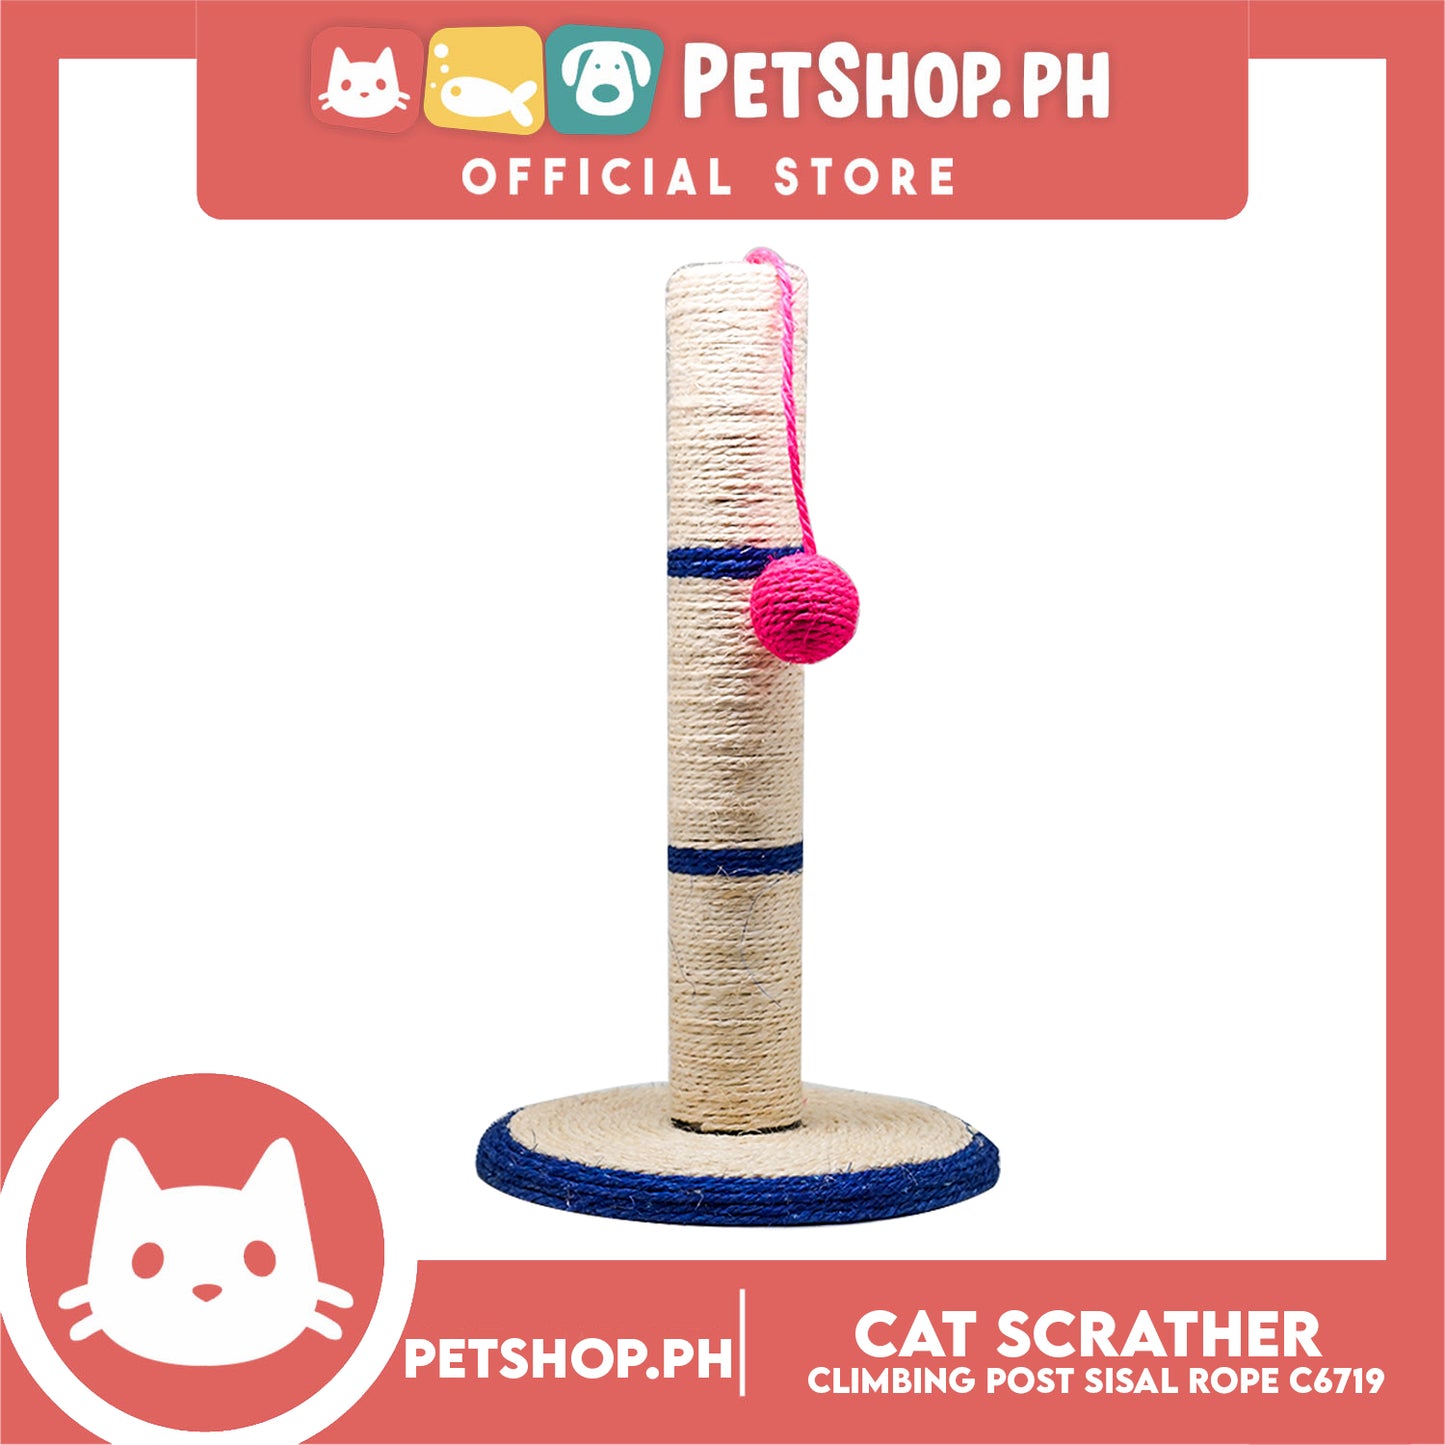 Cat Scratcher Climbing Post and Sisal Rope C6719 with Dangling Teasing Rope for Cat Grinding Claws & Protecting Furniture